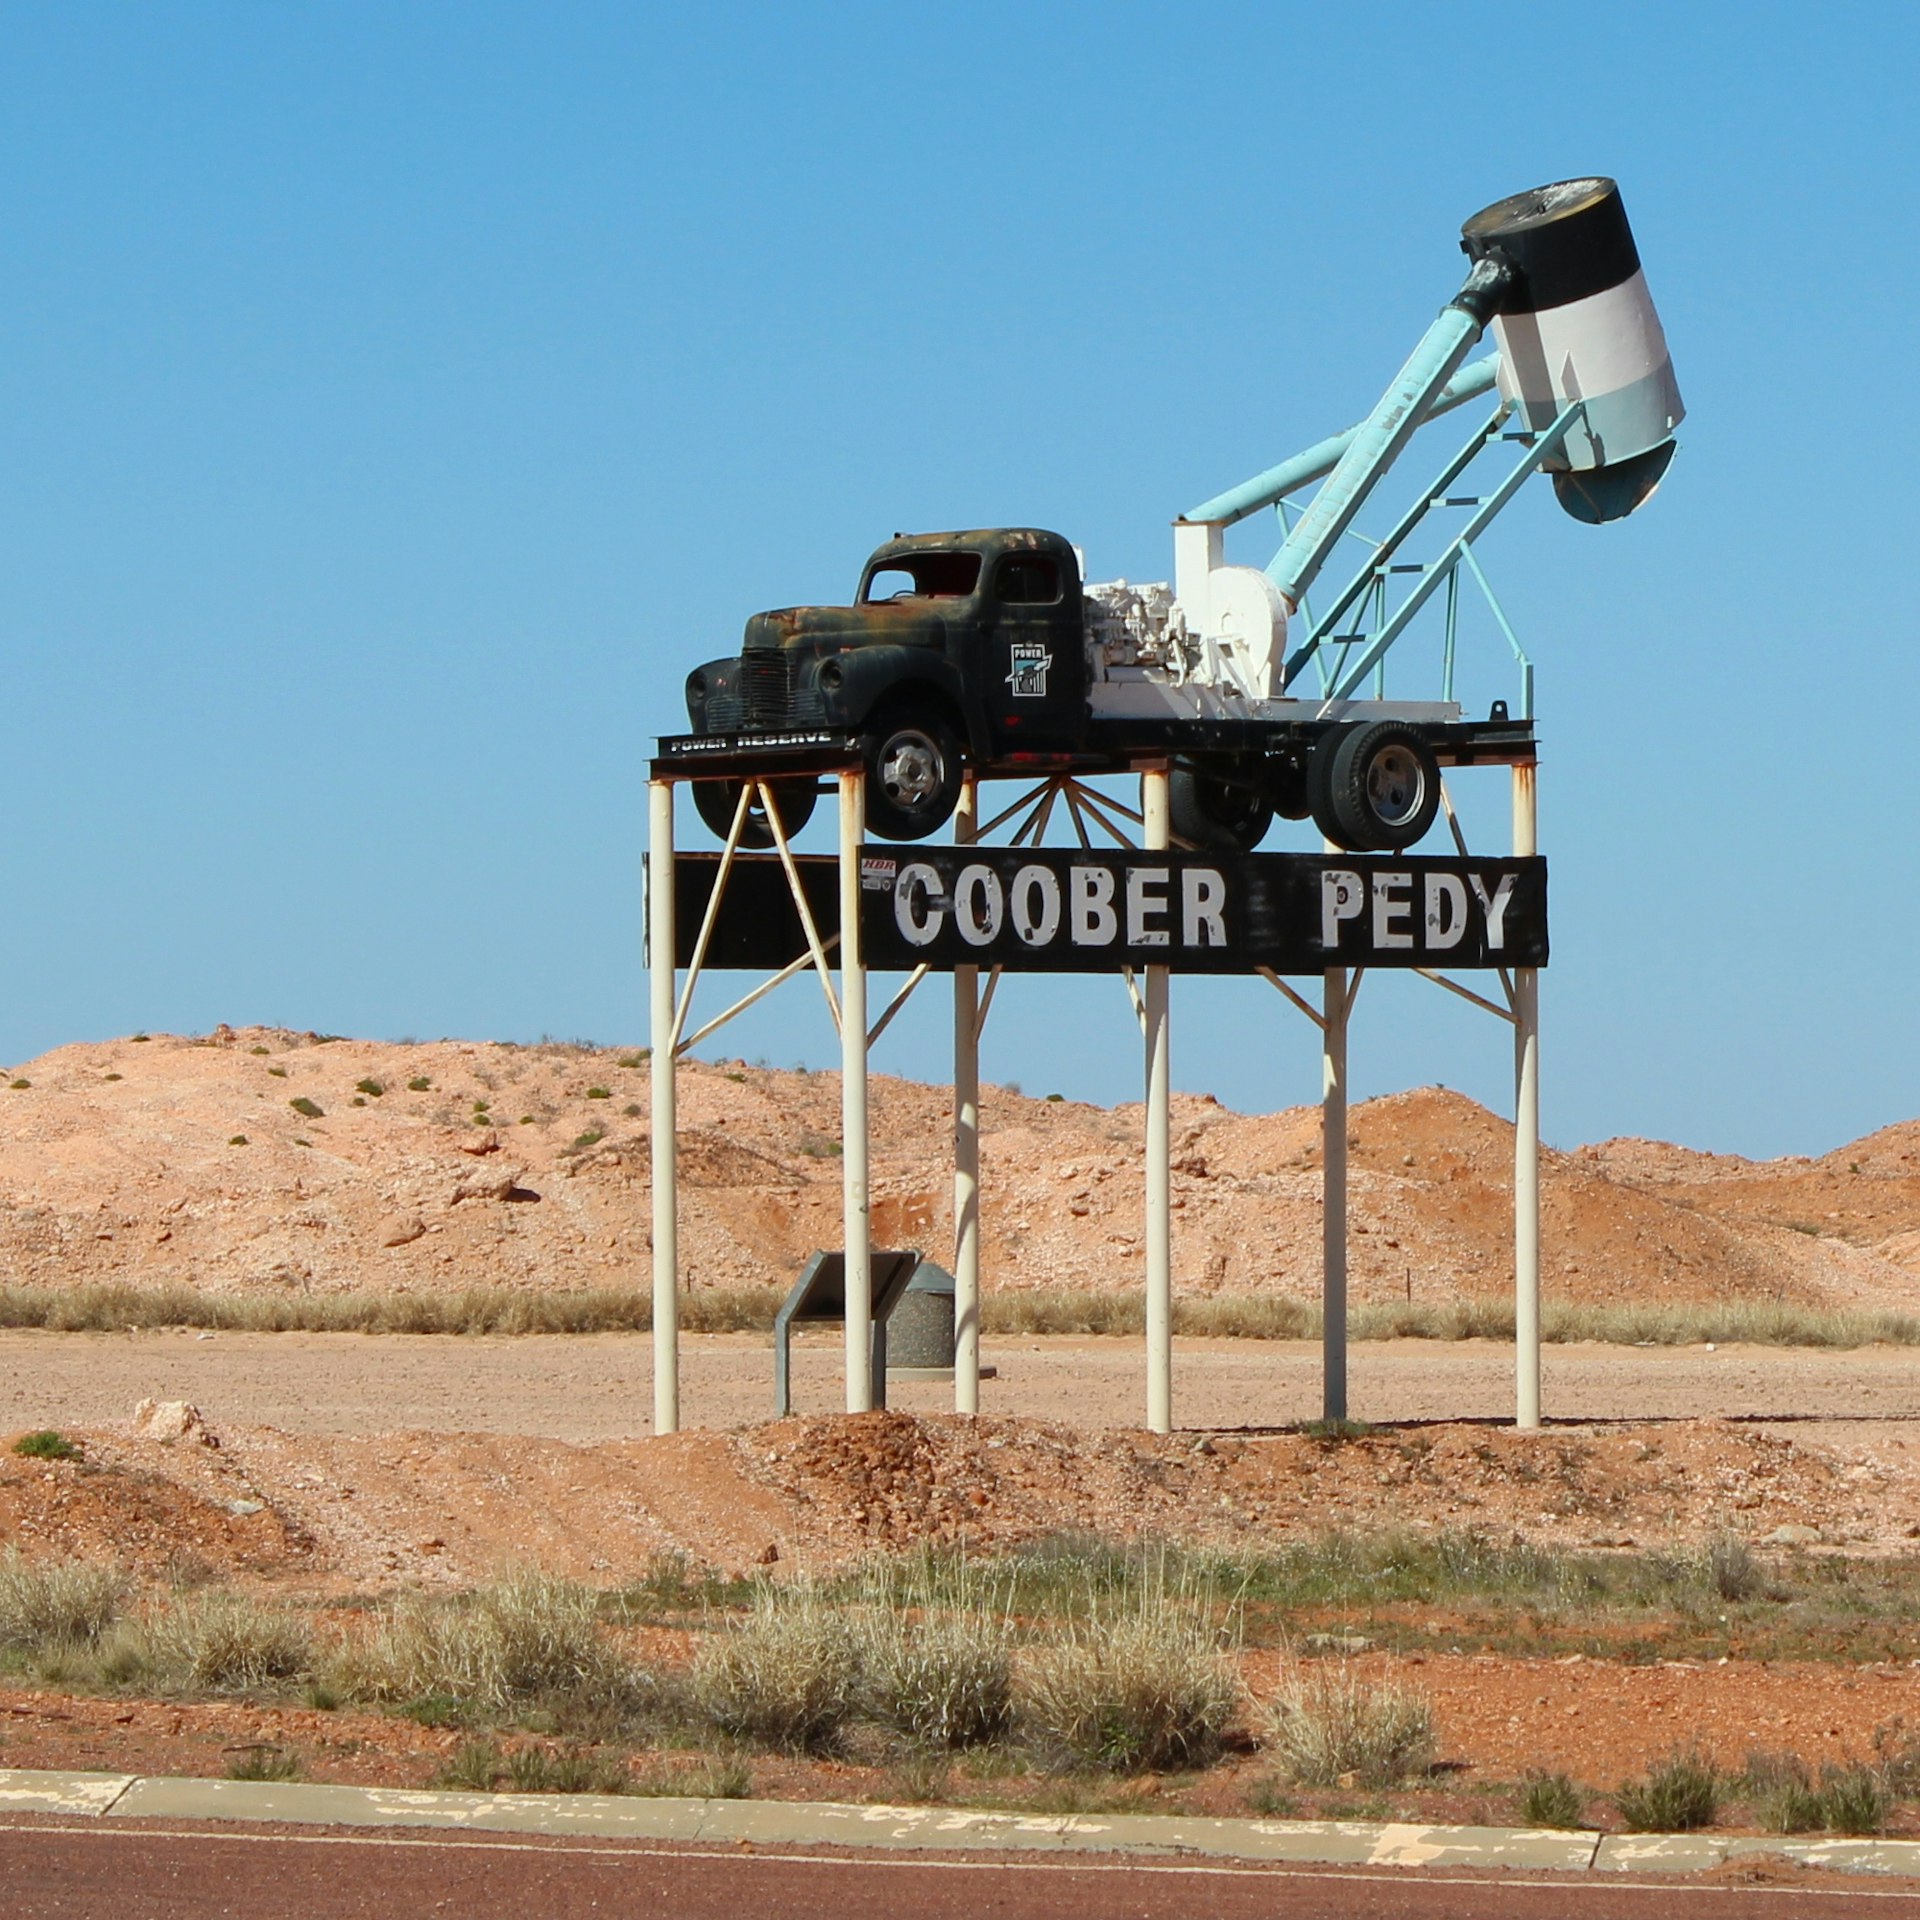 An old mining truck above the Coober Pedy town sign